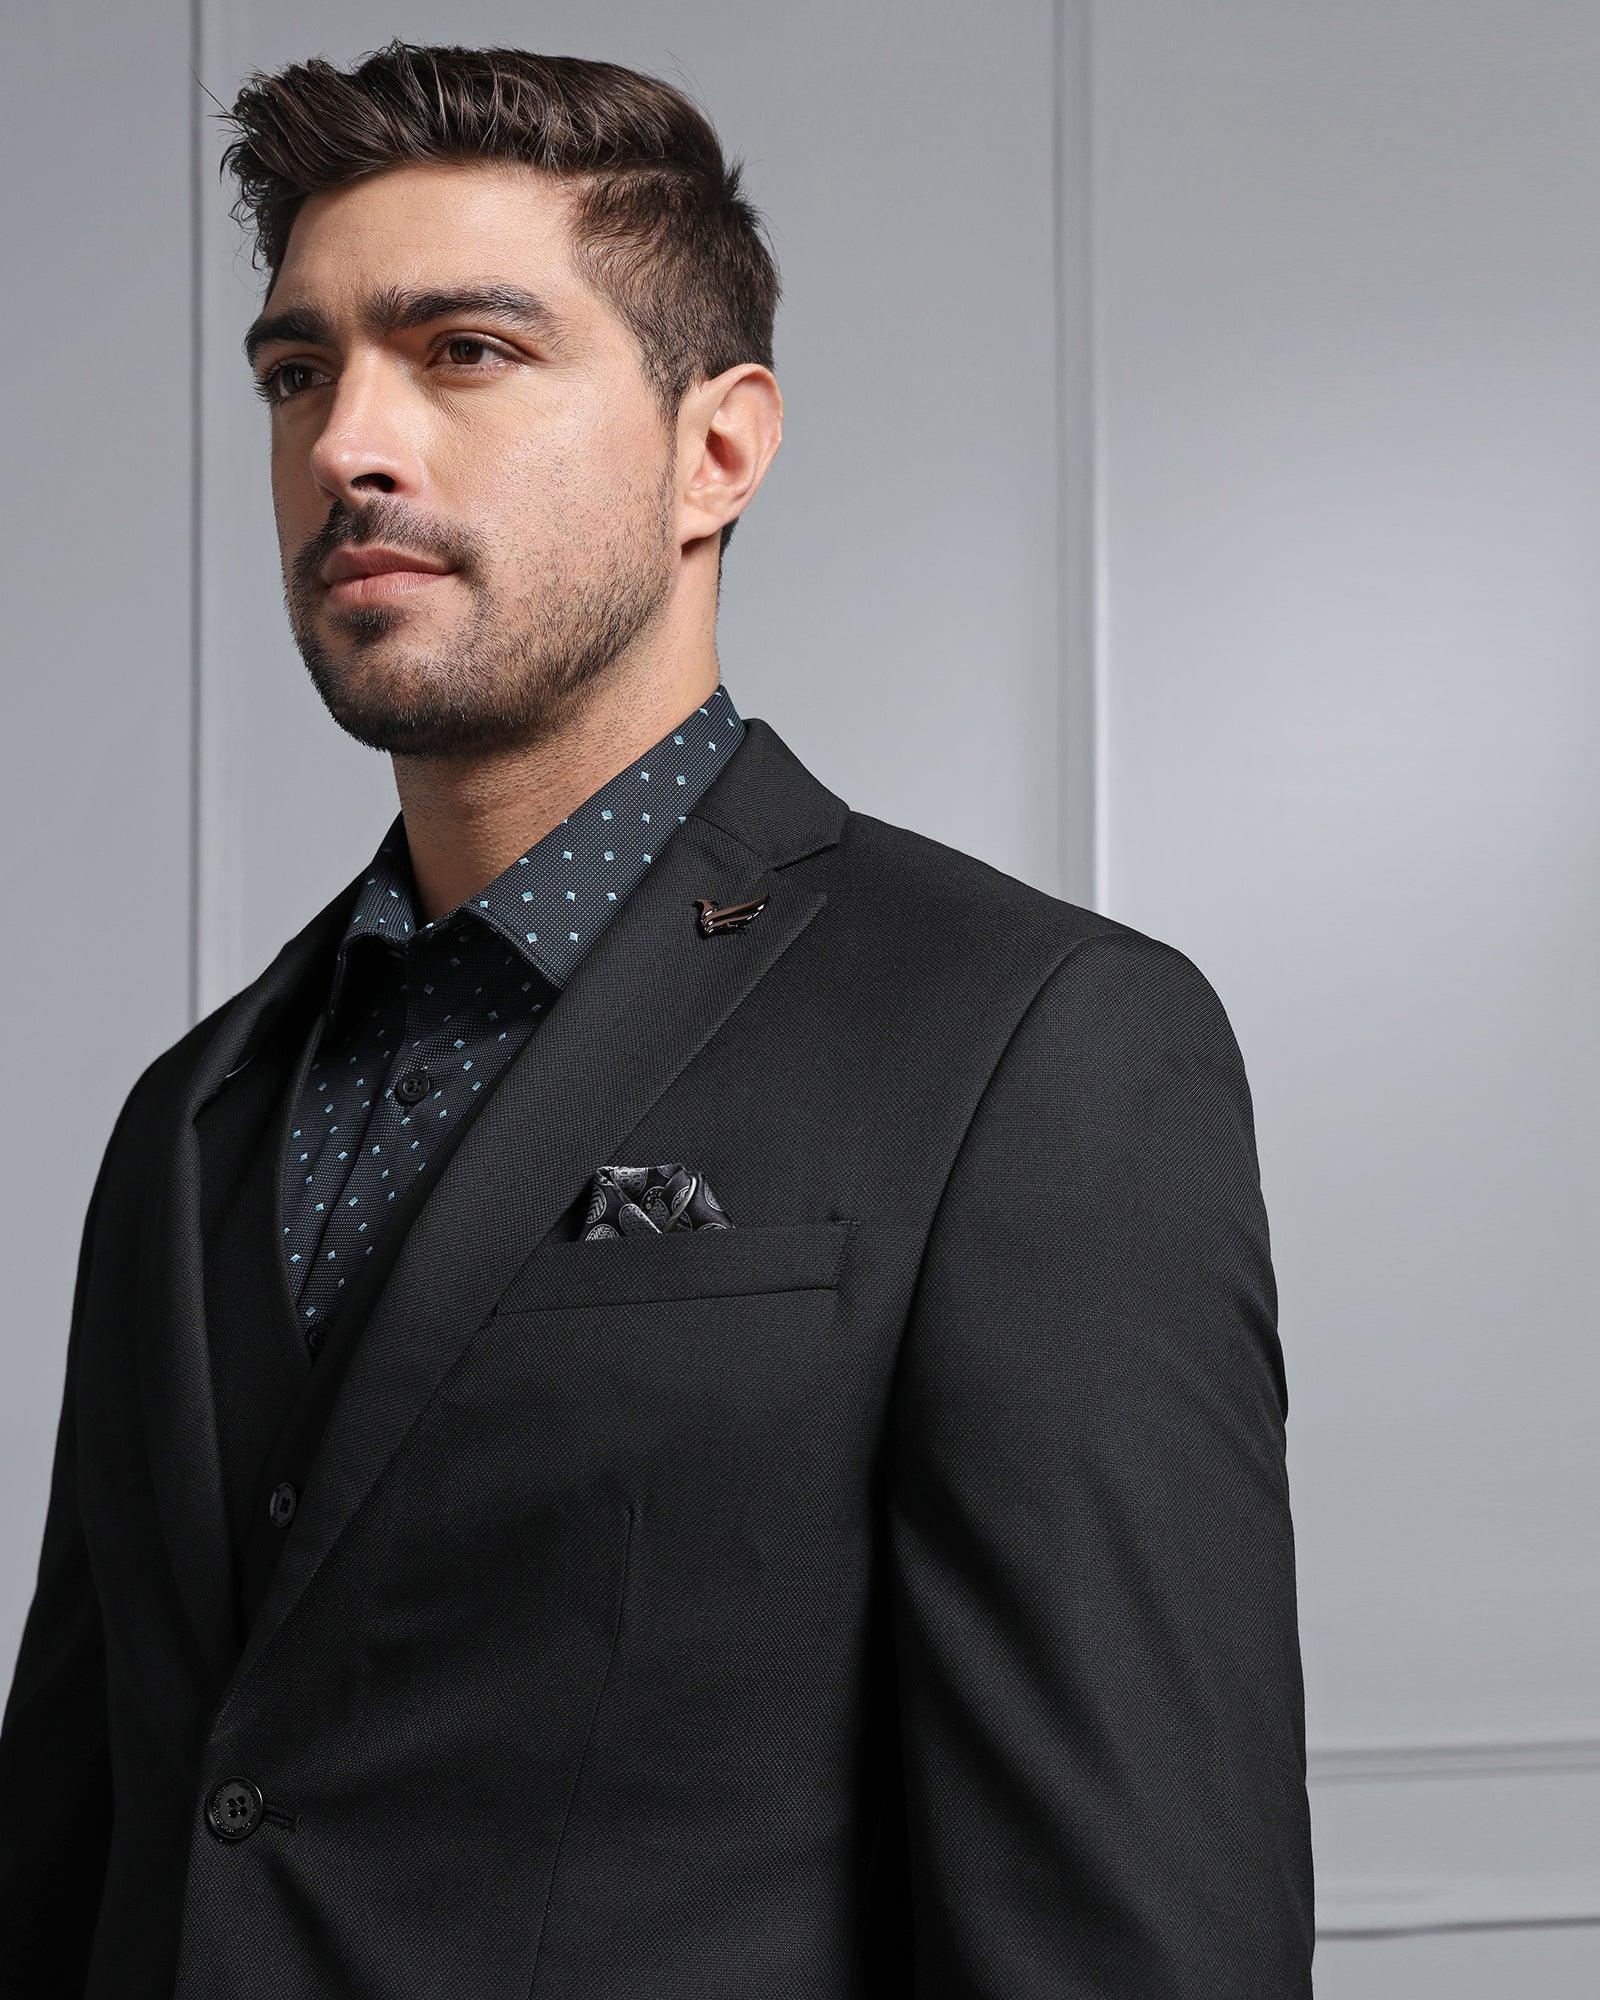 Three Piece Black Textured Formal Suits - Carbon